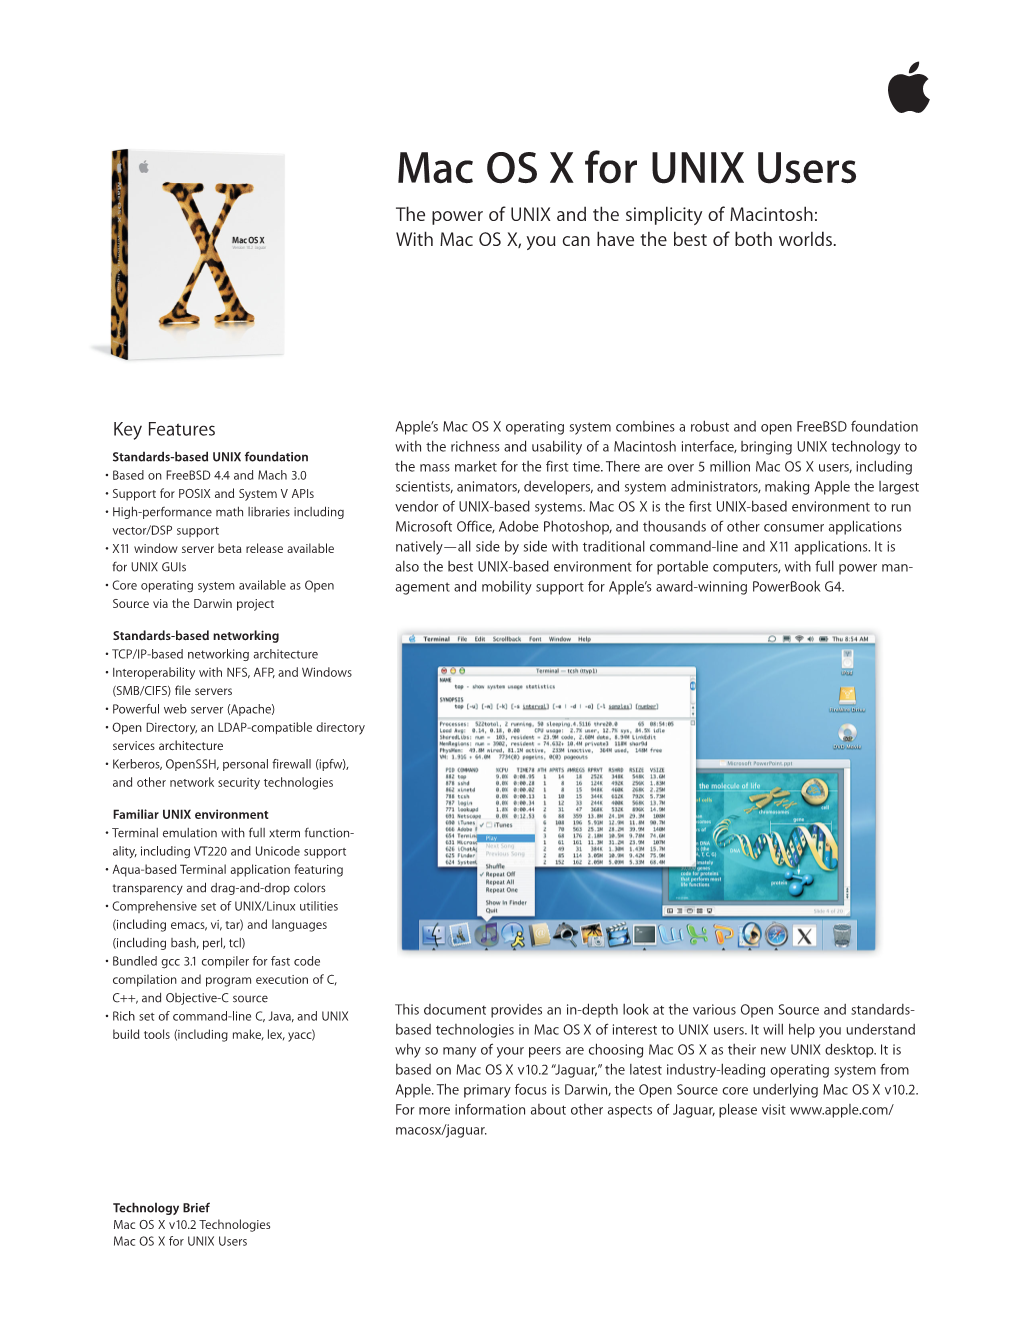 Mac OS X for UNIX Users the Power of UNIX and the Simplicity of Macintosh: with Mac OS X, You Can Have the Best of Both Worlds